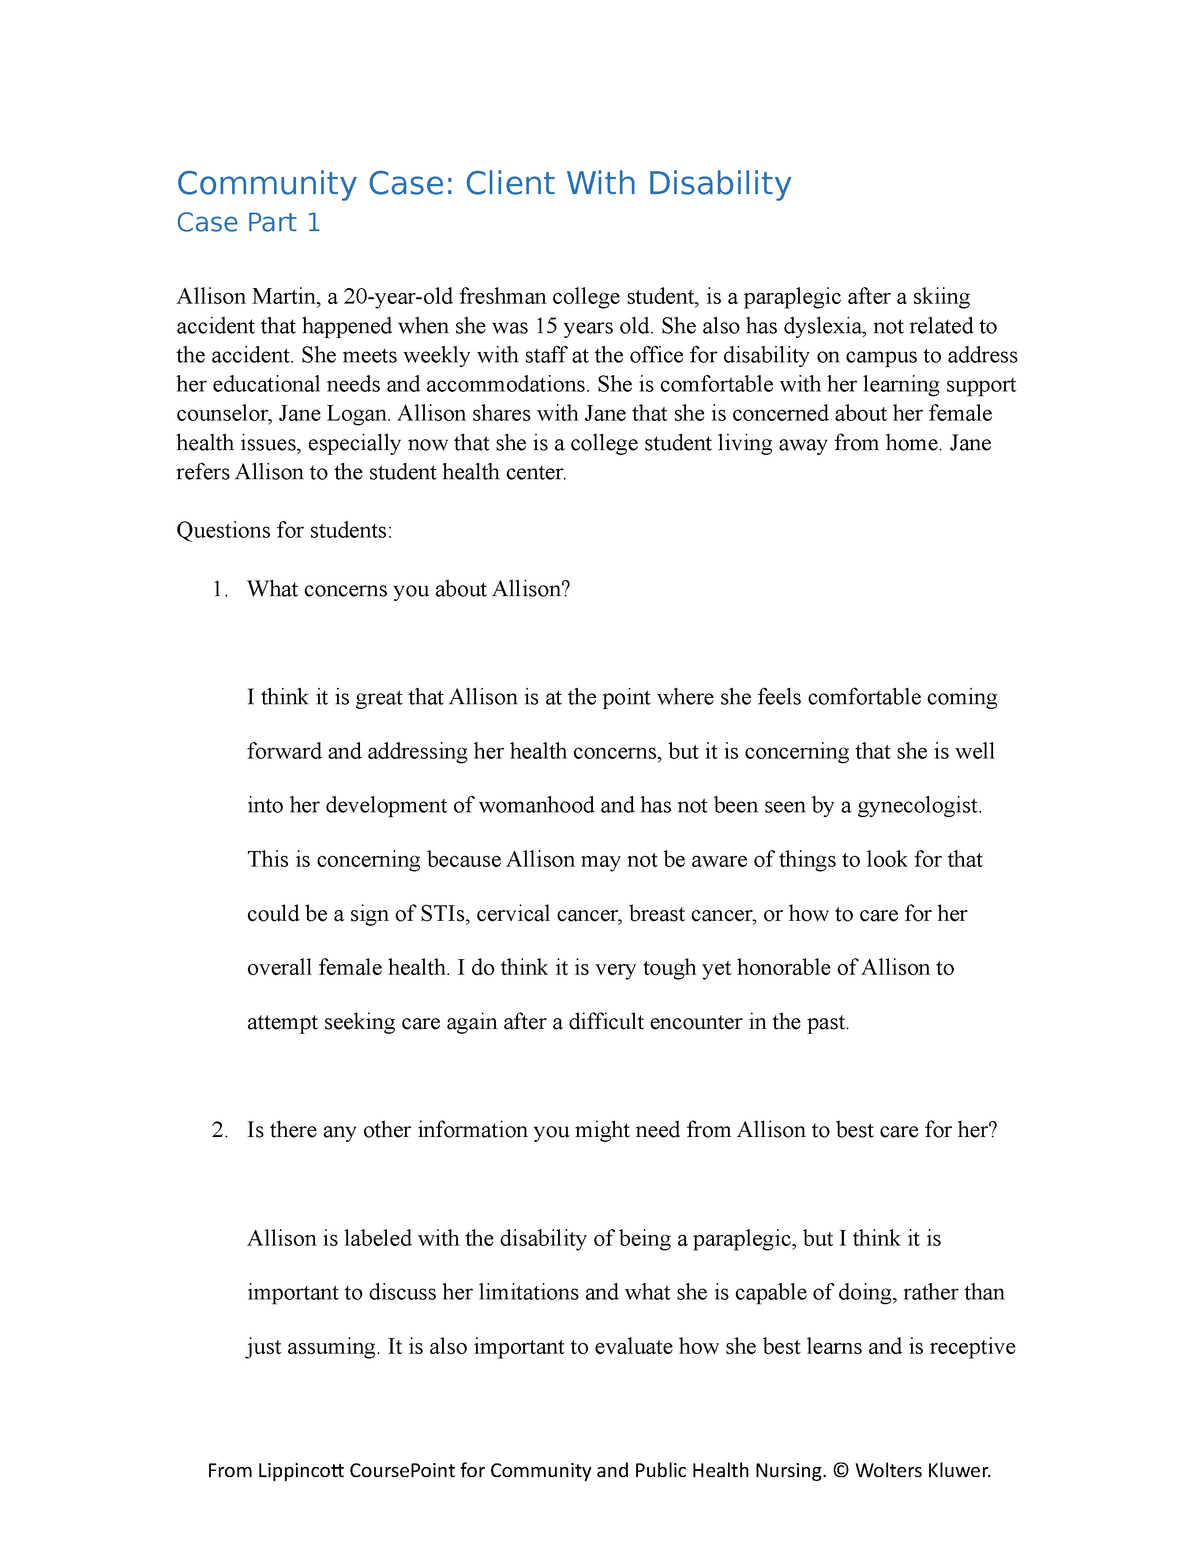 case study of an individual with disability